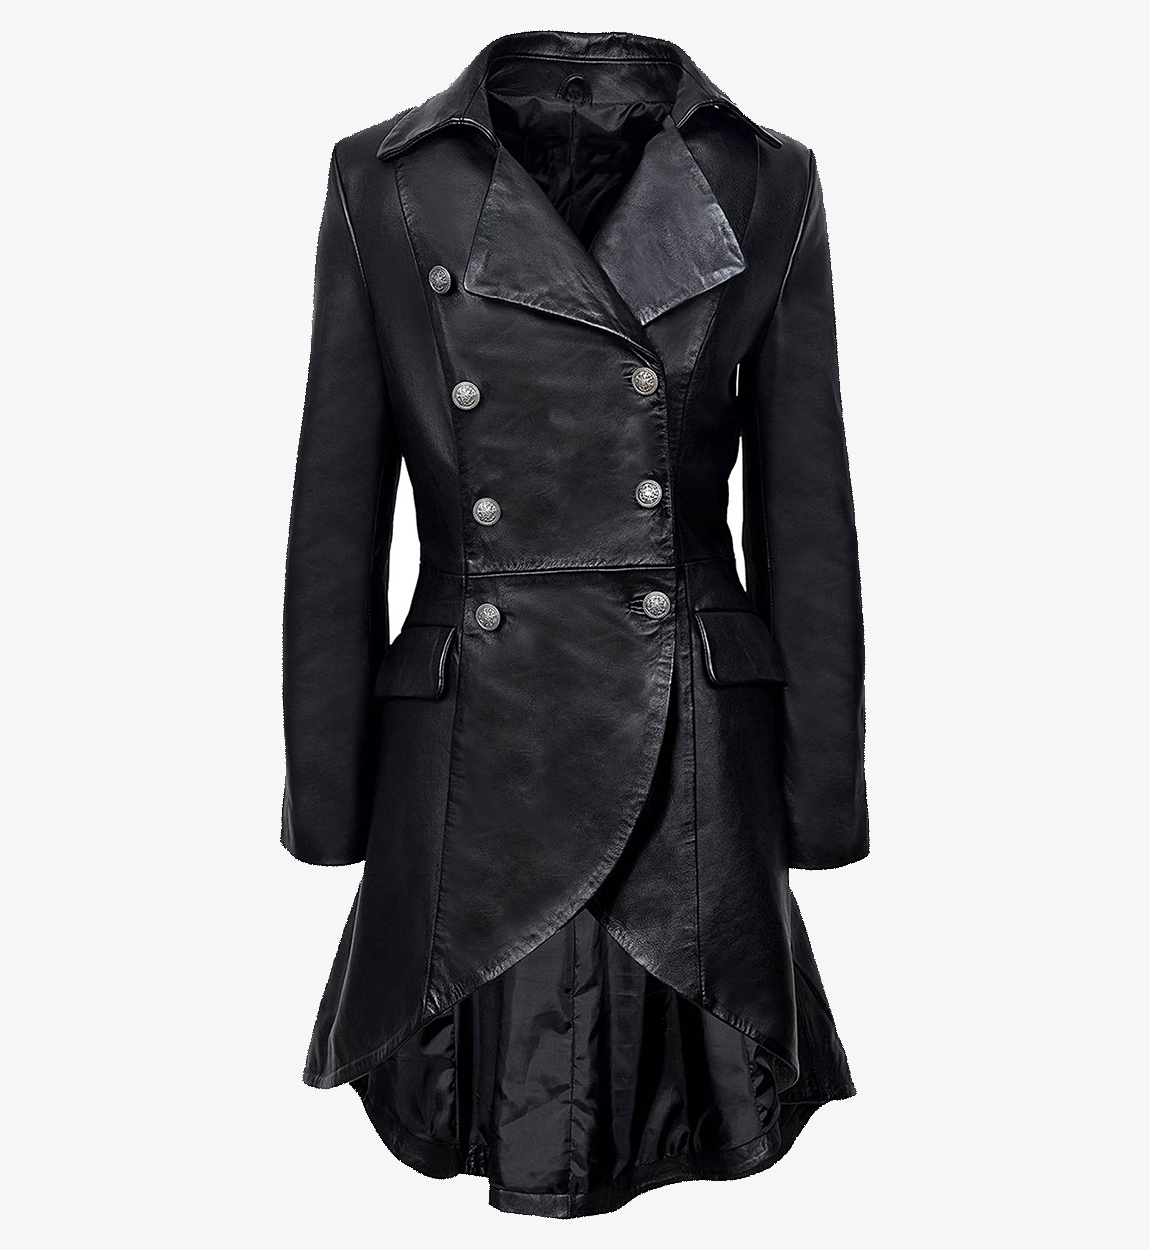 Women's Gothic Style Back Buckle Real Leather Long Coat